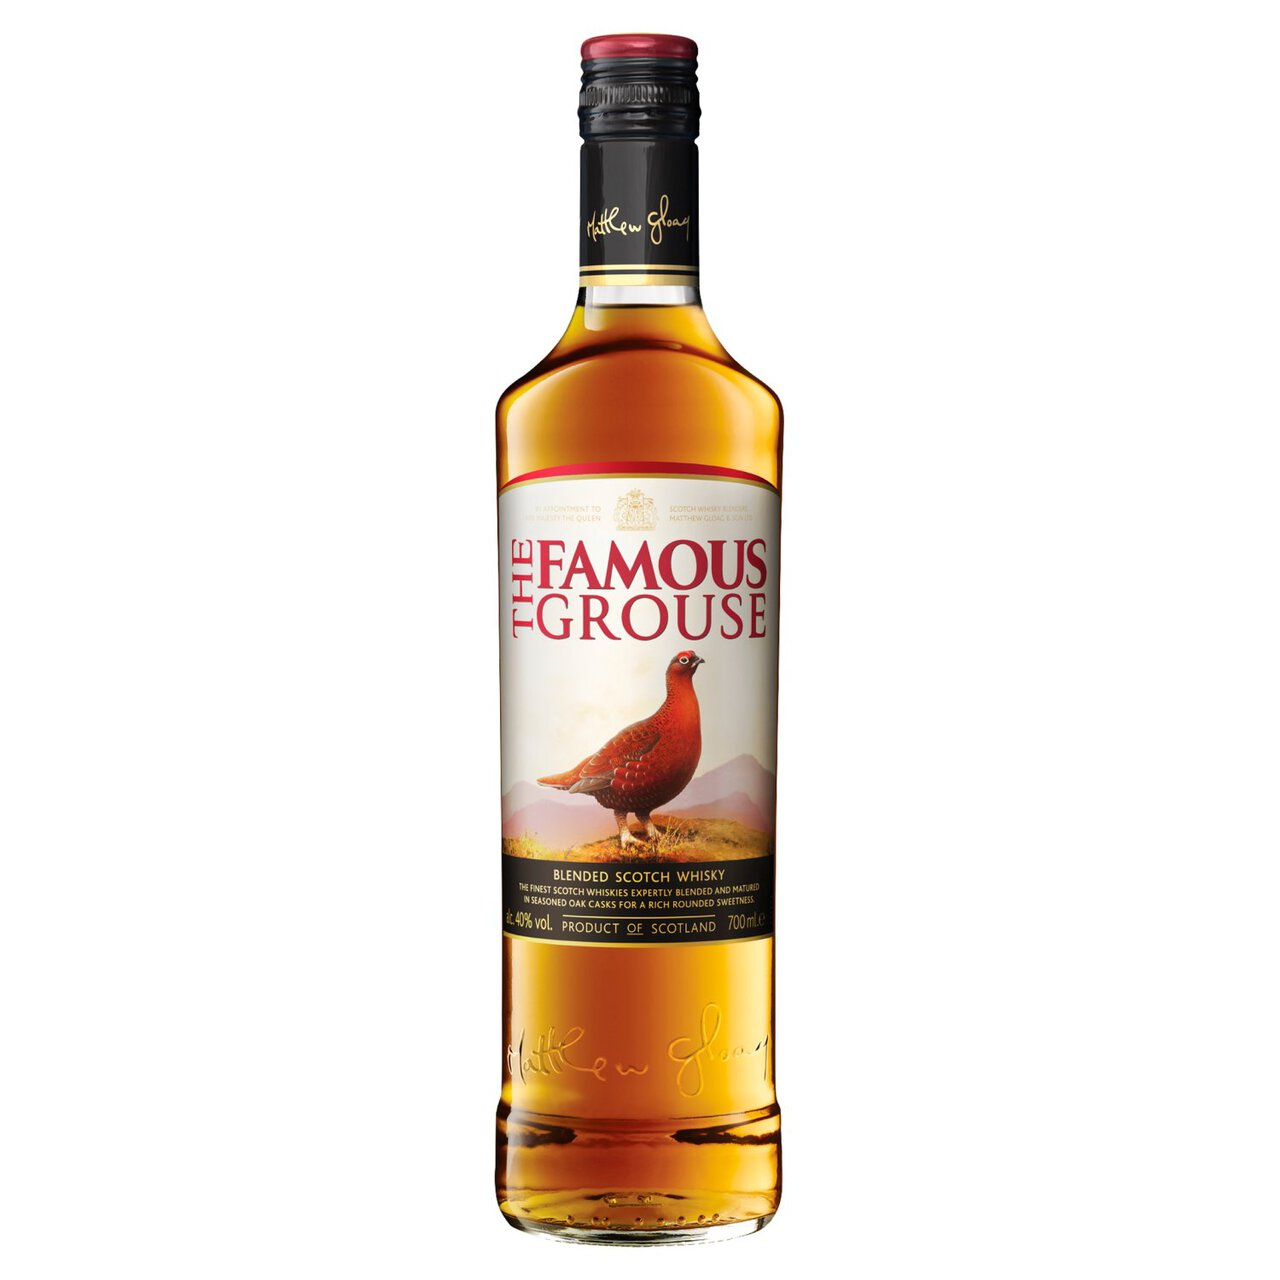 The Famous Grouse Finest Blended Scotch Whisky 70cl